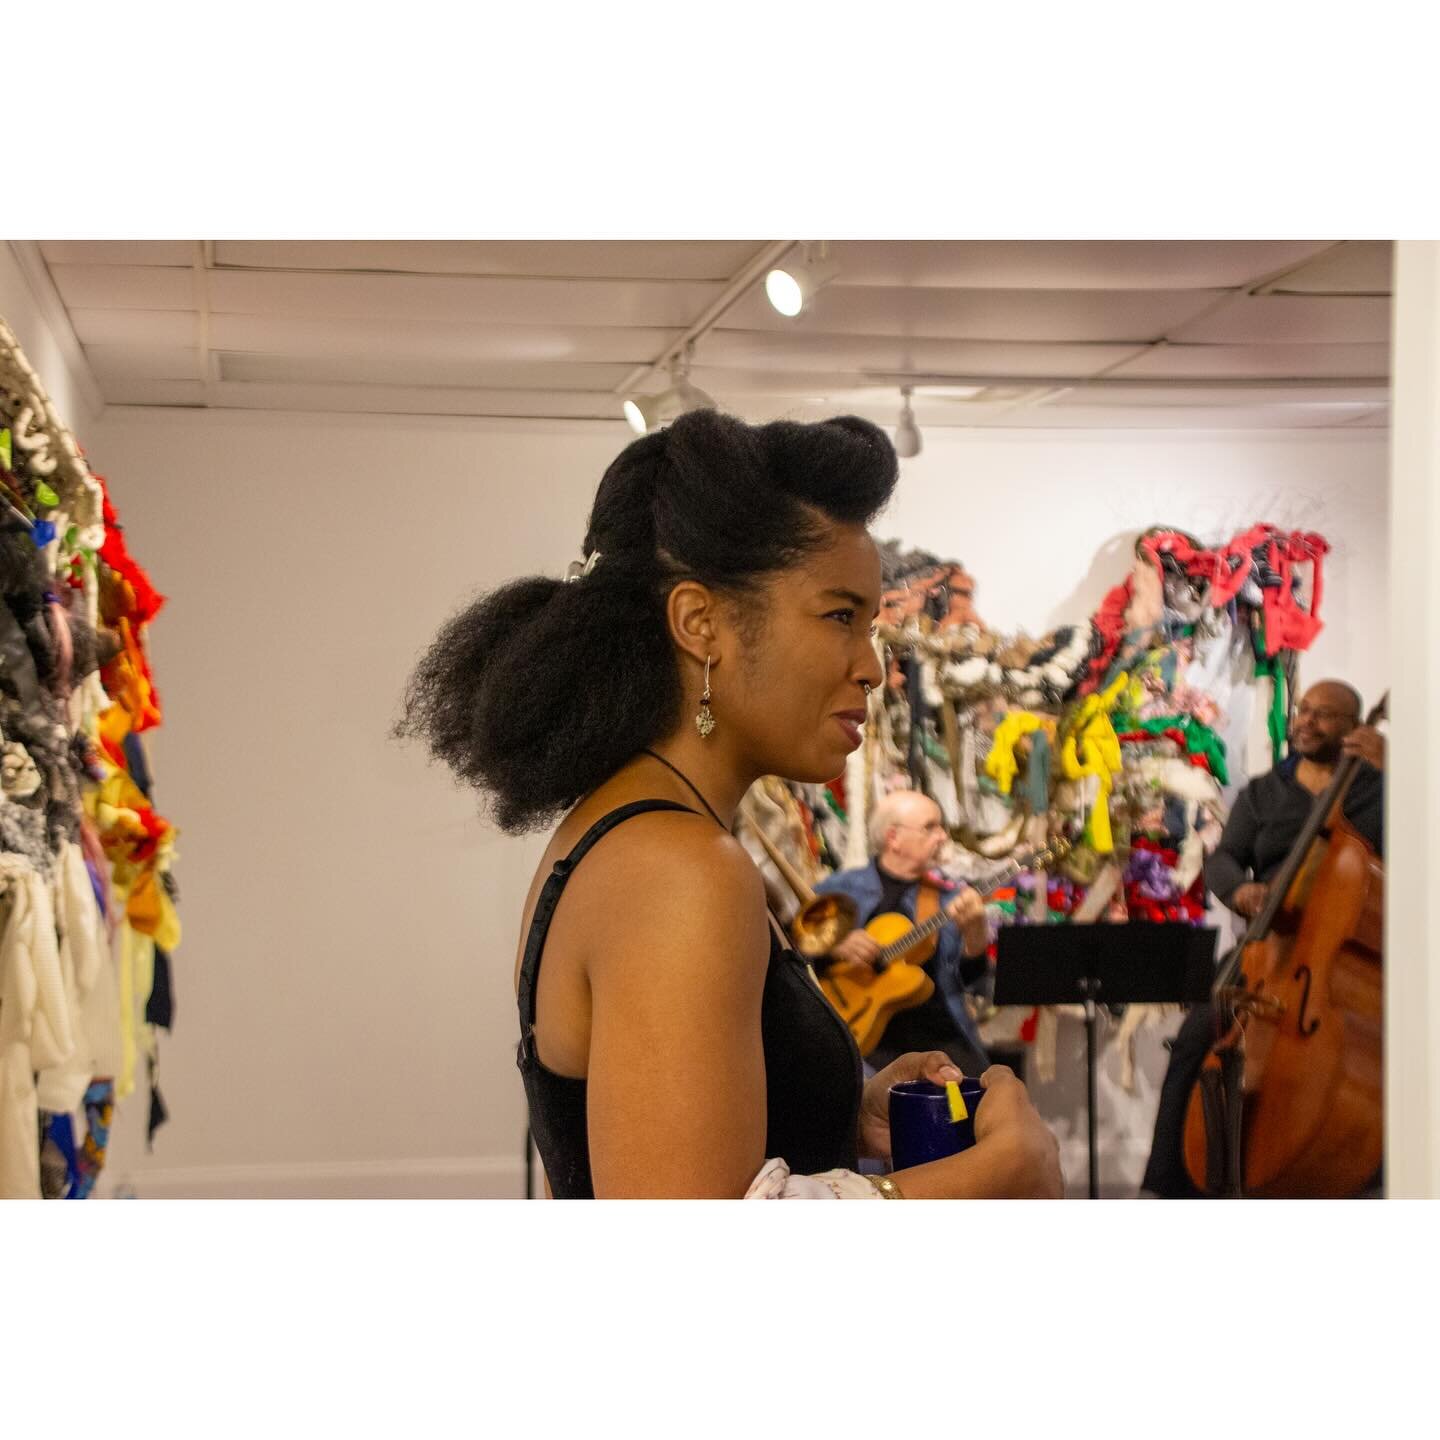 More scenes from March First Friday, which featured the Opening Reception for &ldquo;Wilton Street Rhythm&rdquo; by Gabrielle Torres @get.arttorres accompanied by the Teddy Adams Trio in our Main Gallery; Charles Mack in the Incubator Artist Studio; 